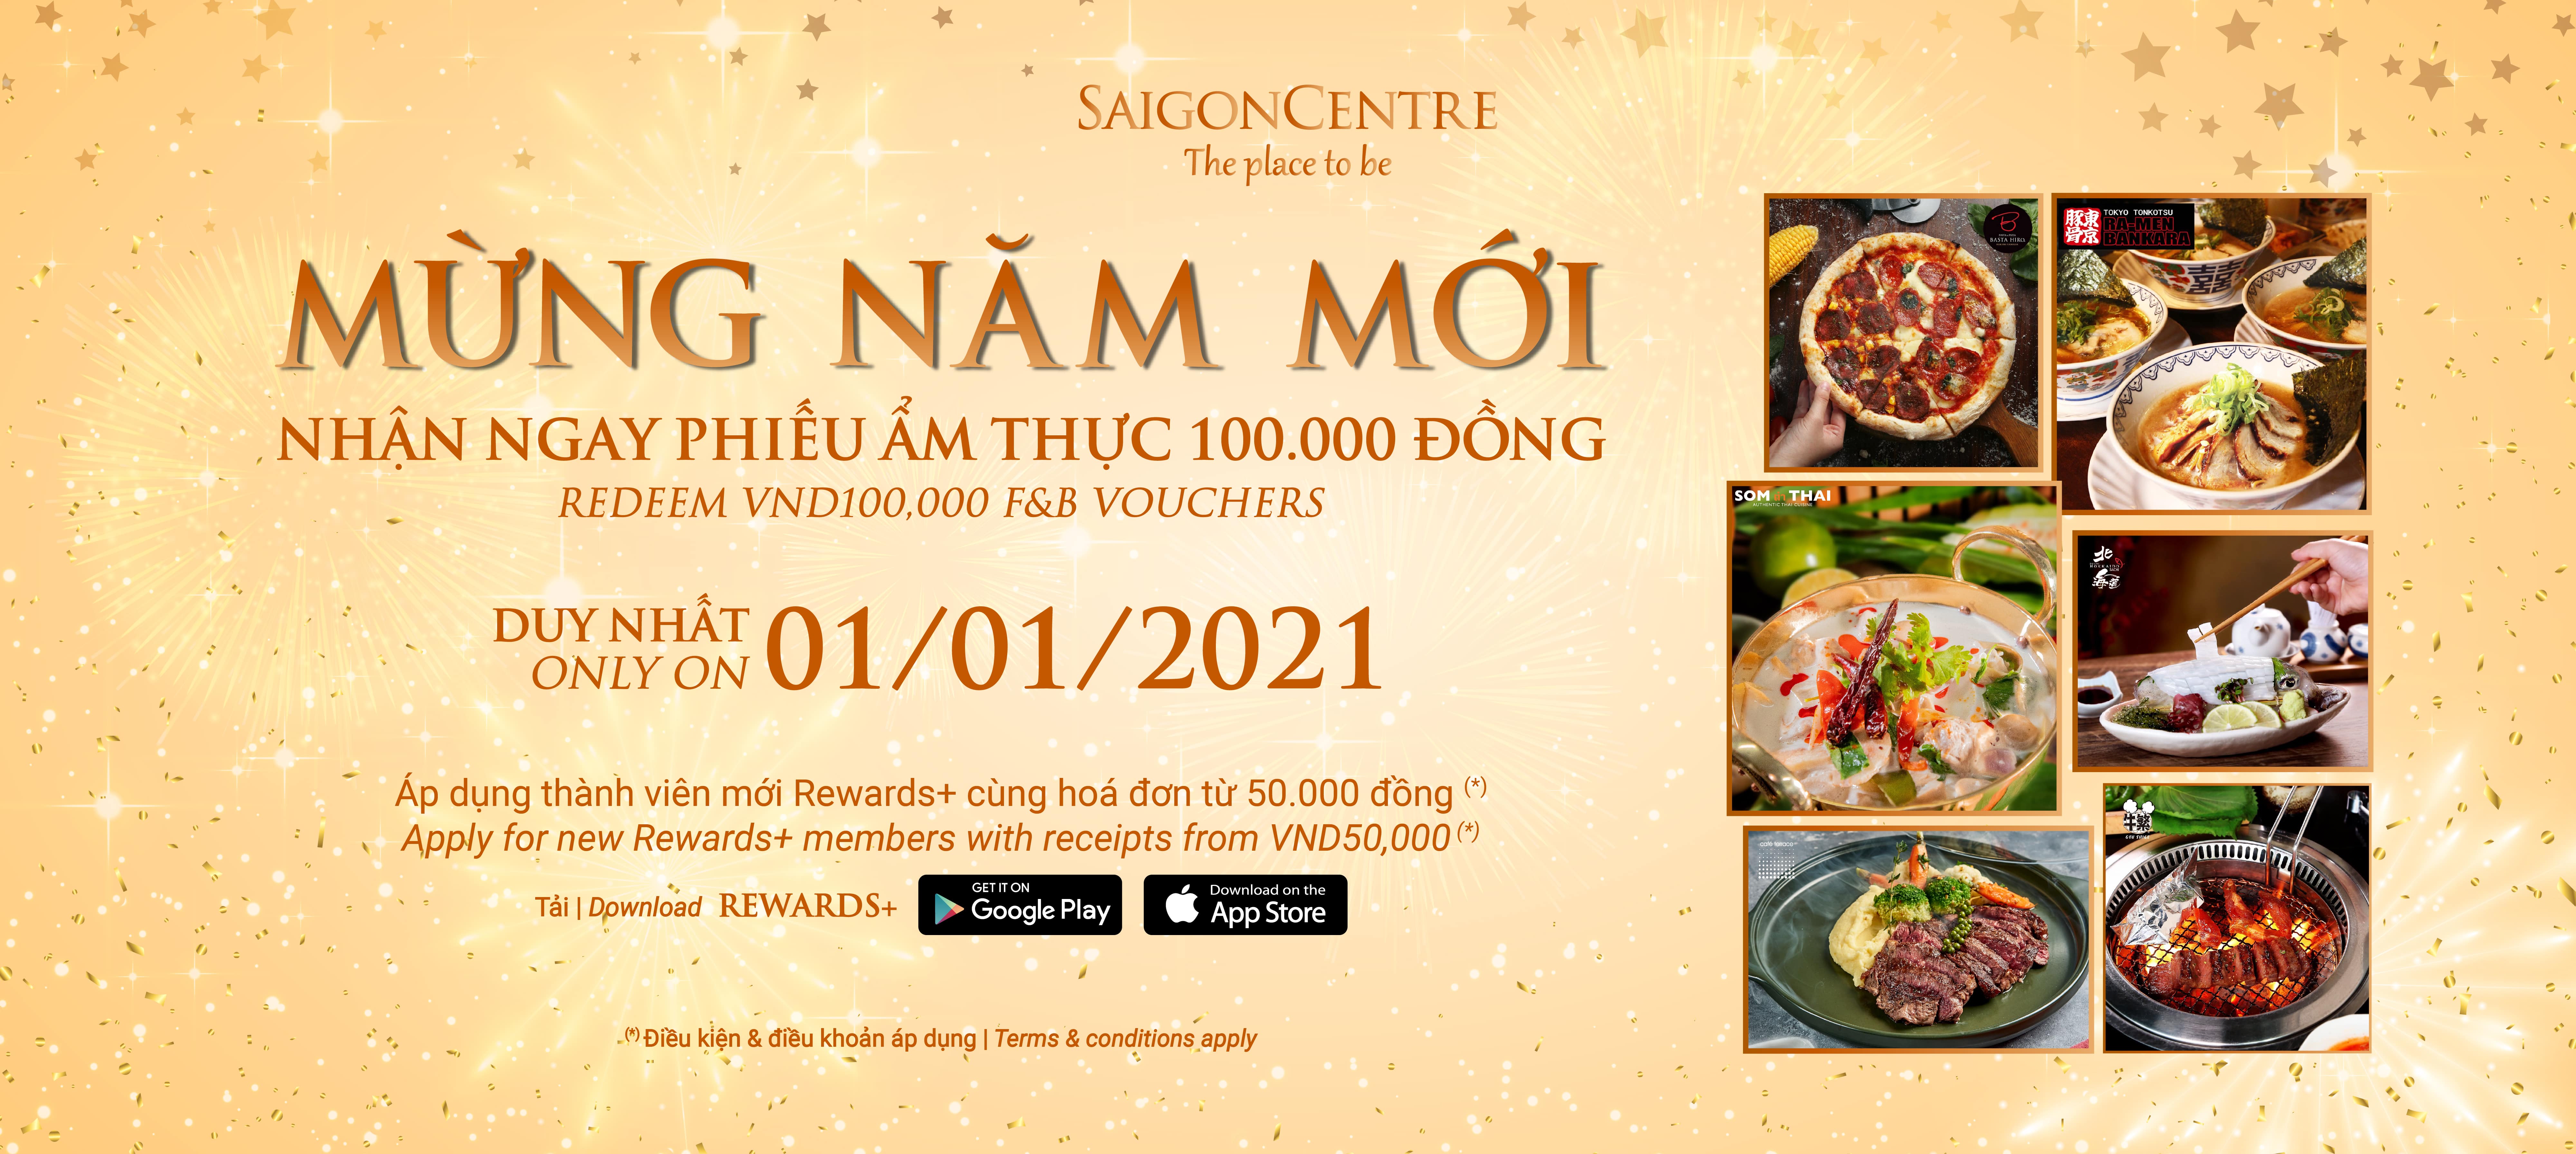 VND100K F&B VOUCHERS FOR NEW REWARDS+ MEMBERS